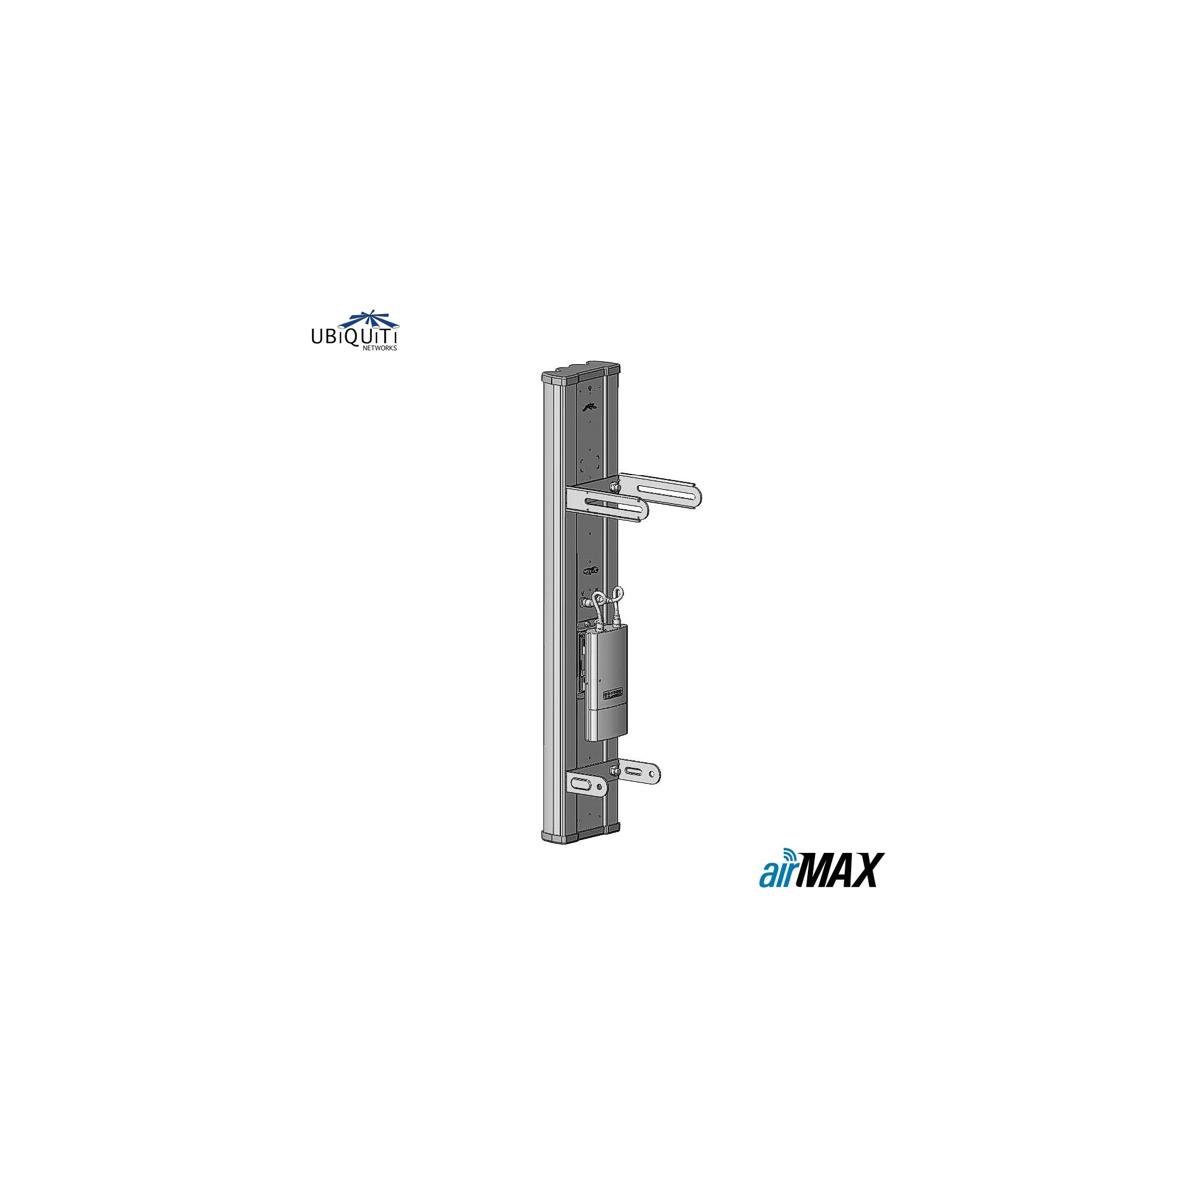 WLAN-Antenne 2x2 Basestation-Antenne AM-5G17-90 5 MIMO - GHz Networks Ubiquiti